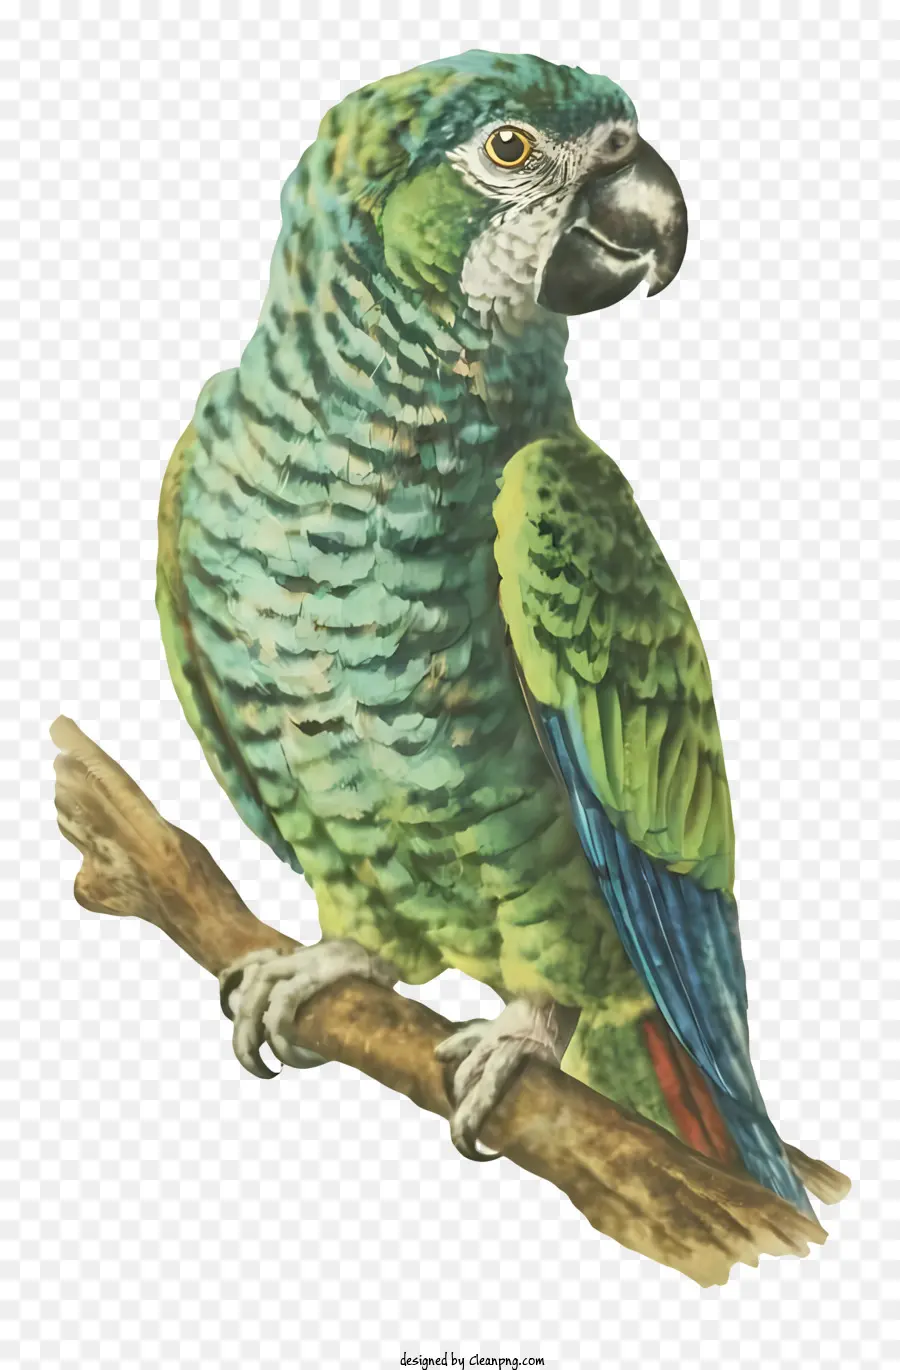 green parrot wings spread out perched bird tail feathers blue beak